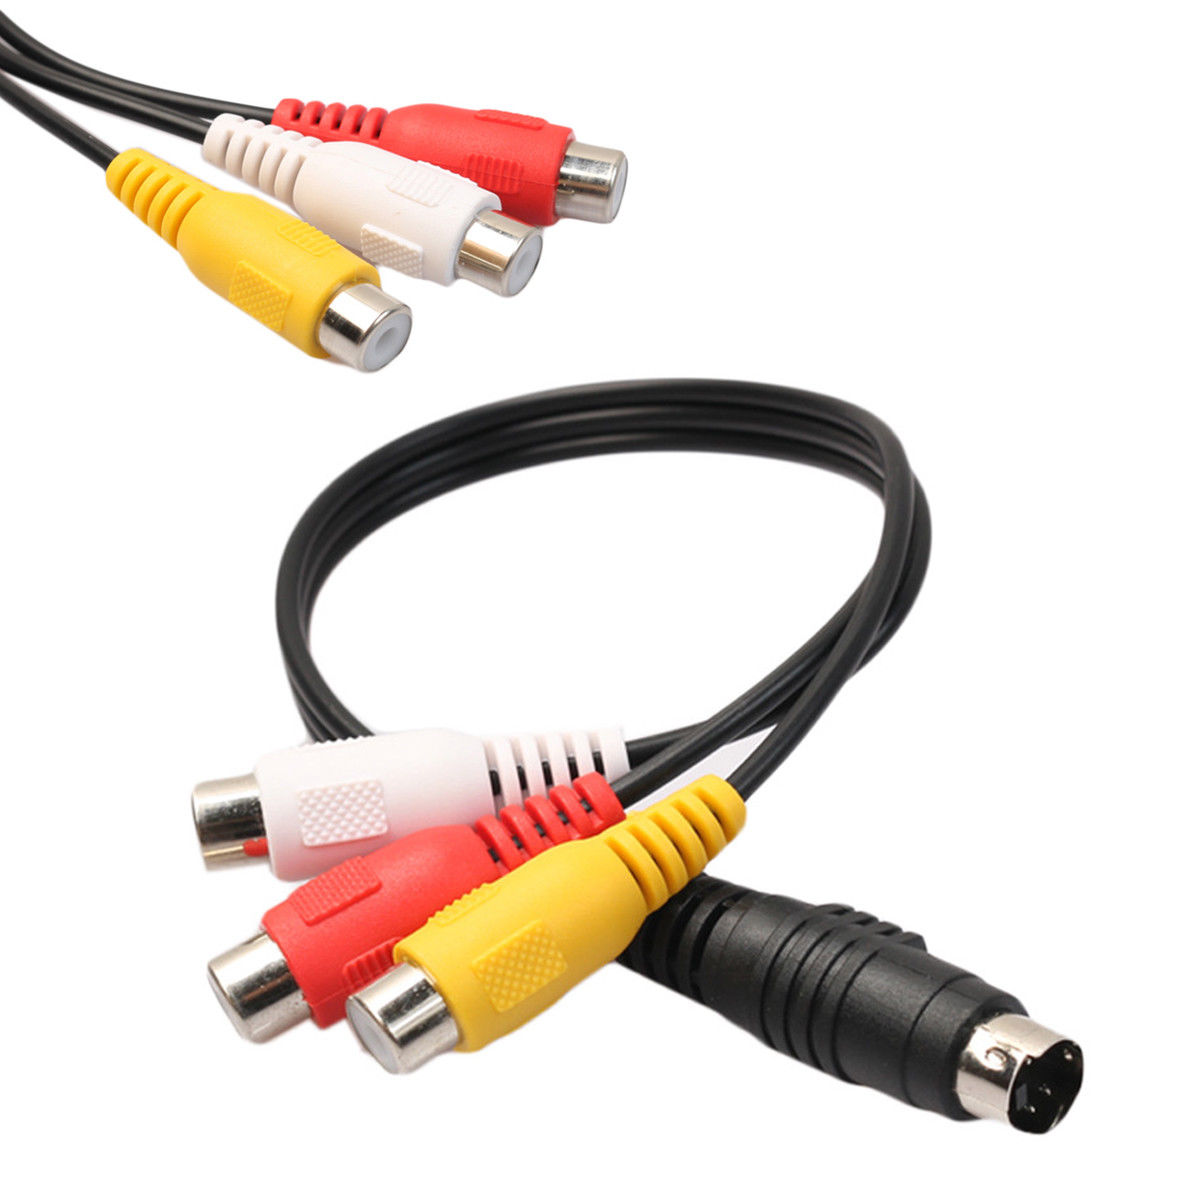 S-VIdeo 4 Pin (M) to 3 RCA (F) Adapter Cable 25cm